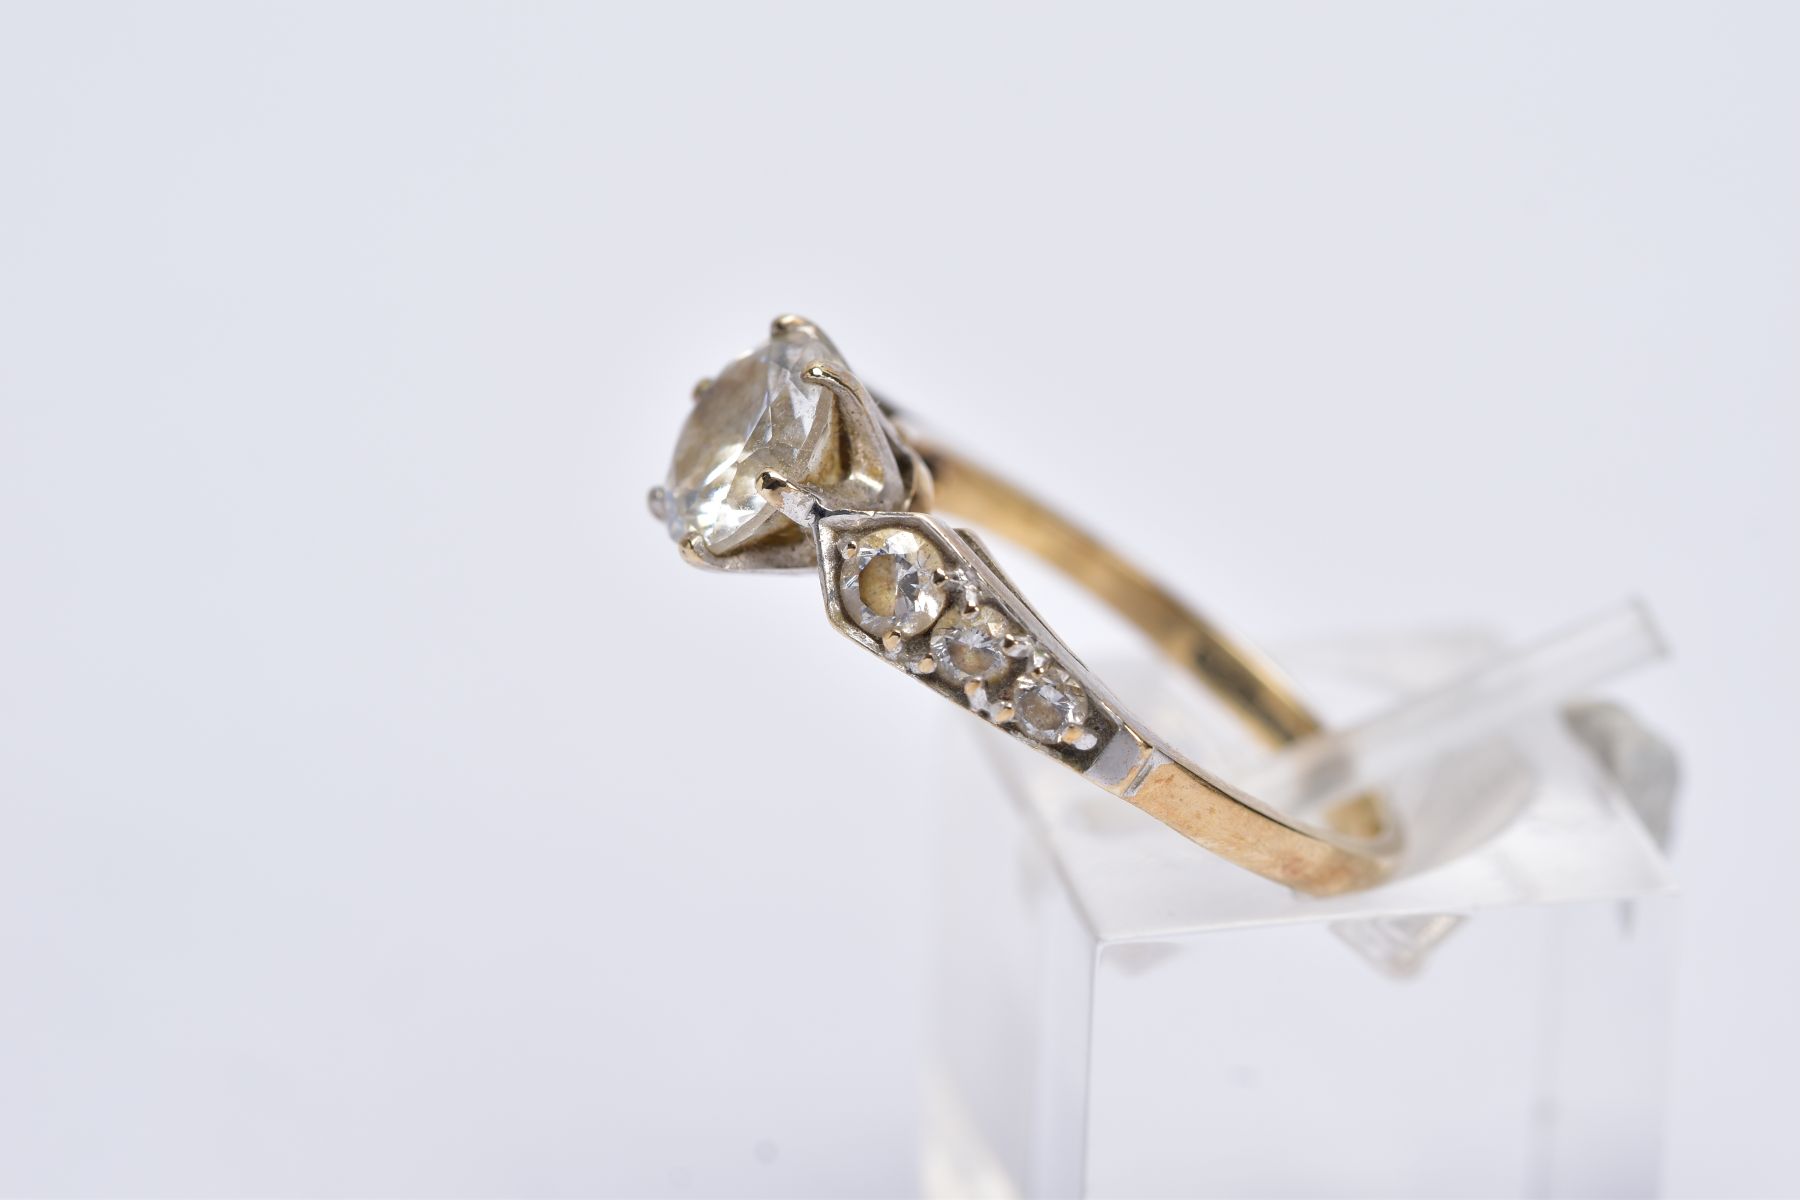 A 9CT GOLD CUBIC ZIRCONIA DRESS RING, ring size N, hallmarked 9ct gold, approximate gross weight 2.9 - Image 2 of 4